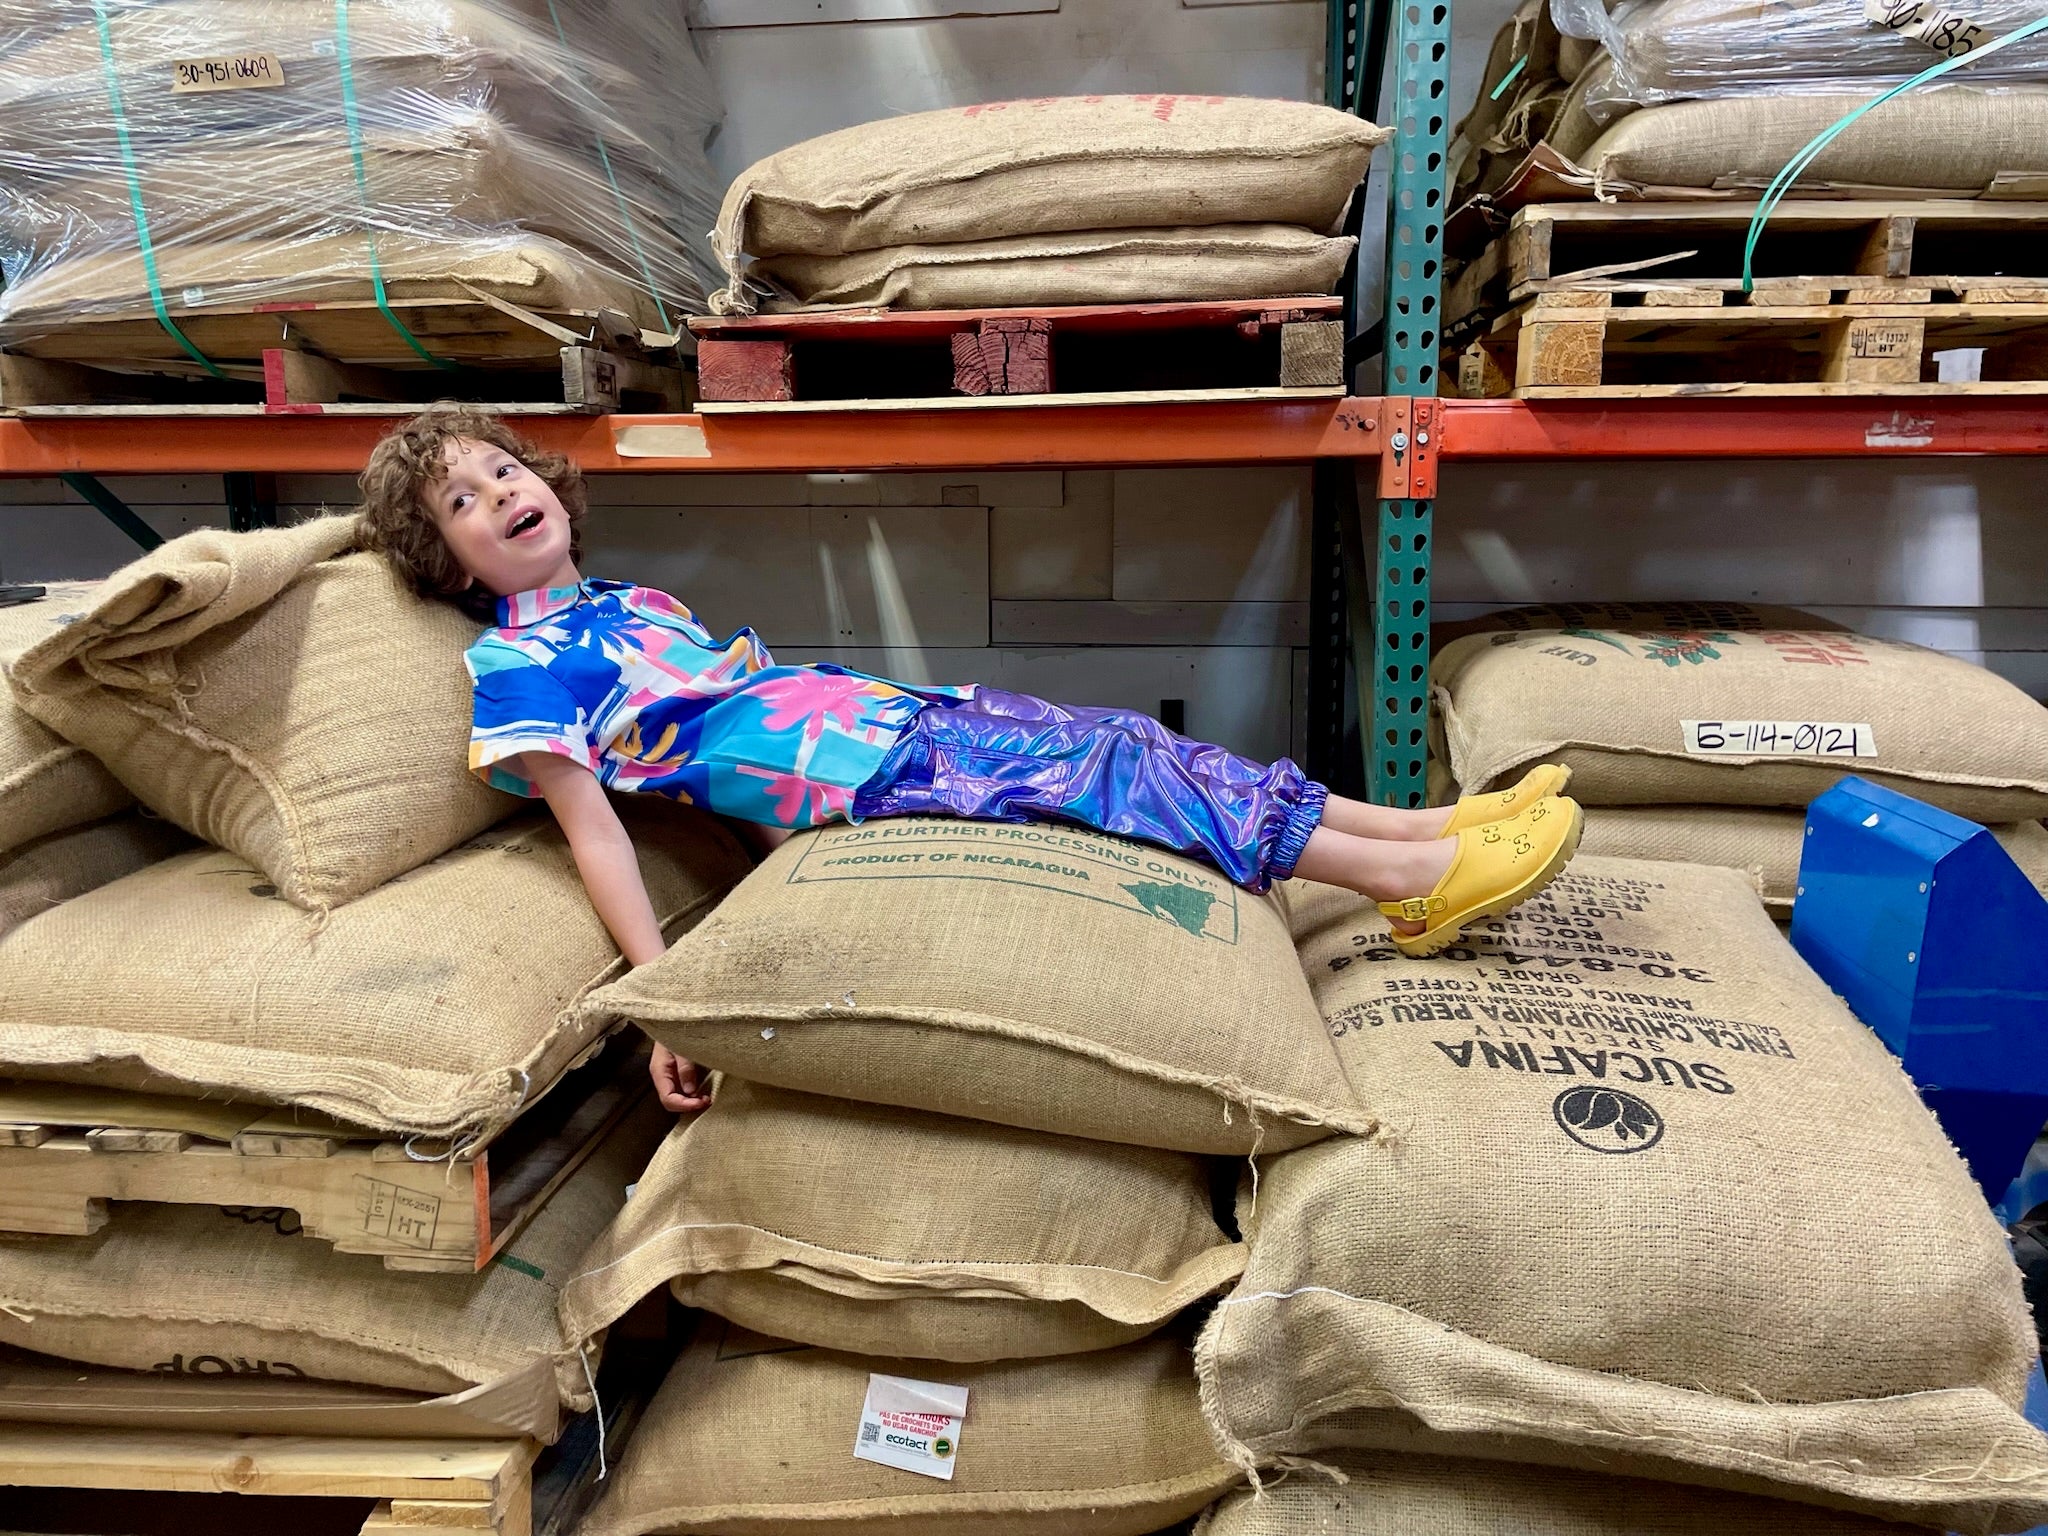 Max lying on a stack of coffee sacks in the Groundwork warehouse